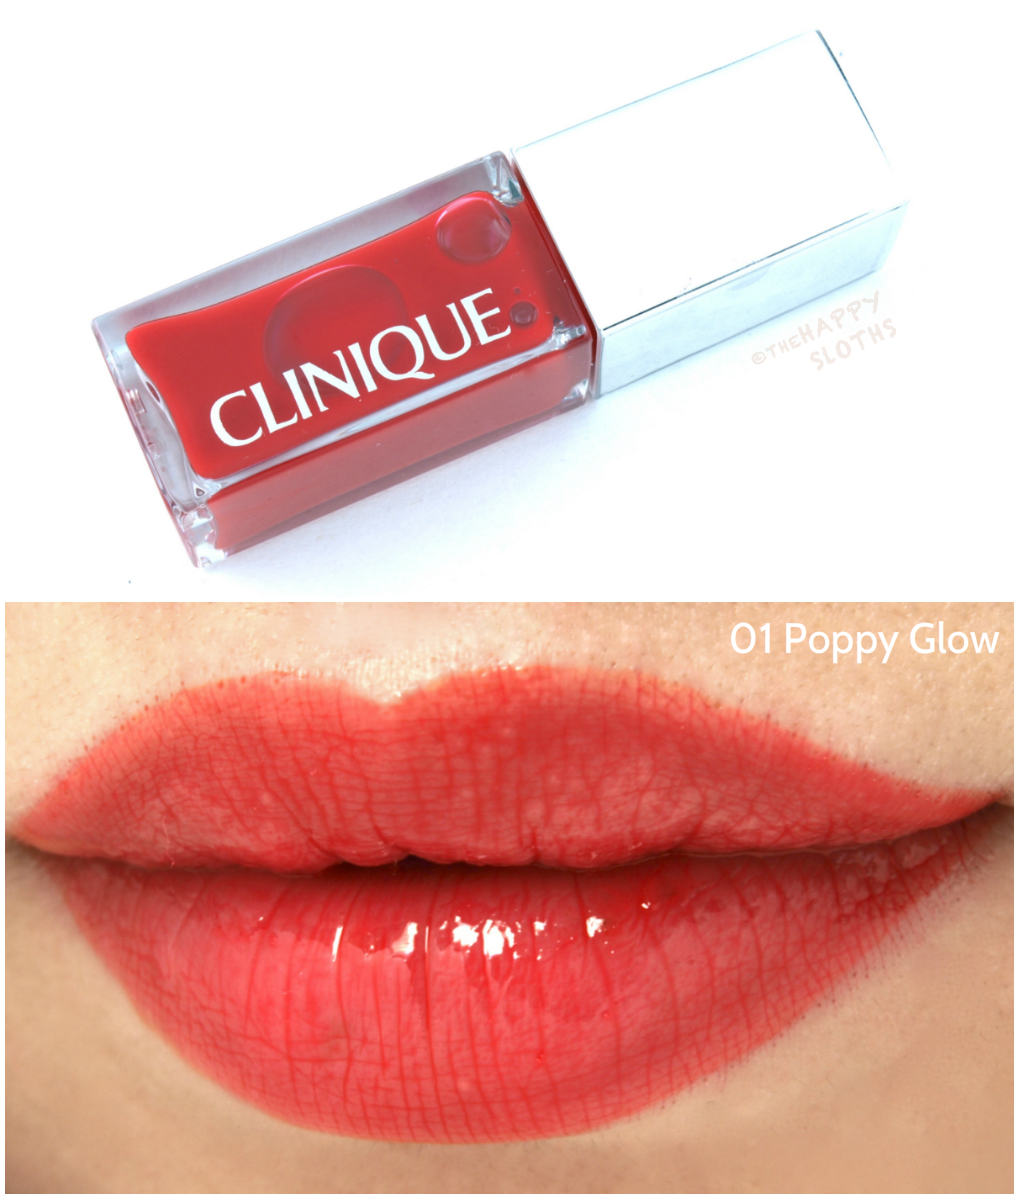 Clinique Pop Lacquer Lip Color Primer and Oil Lip & Cheek Glow: Review and Swatches | The Happy Sloths: Beauty, Makeup, and Skincare Blog with Reviews and Swatches